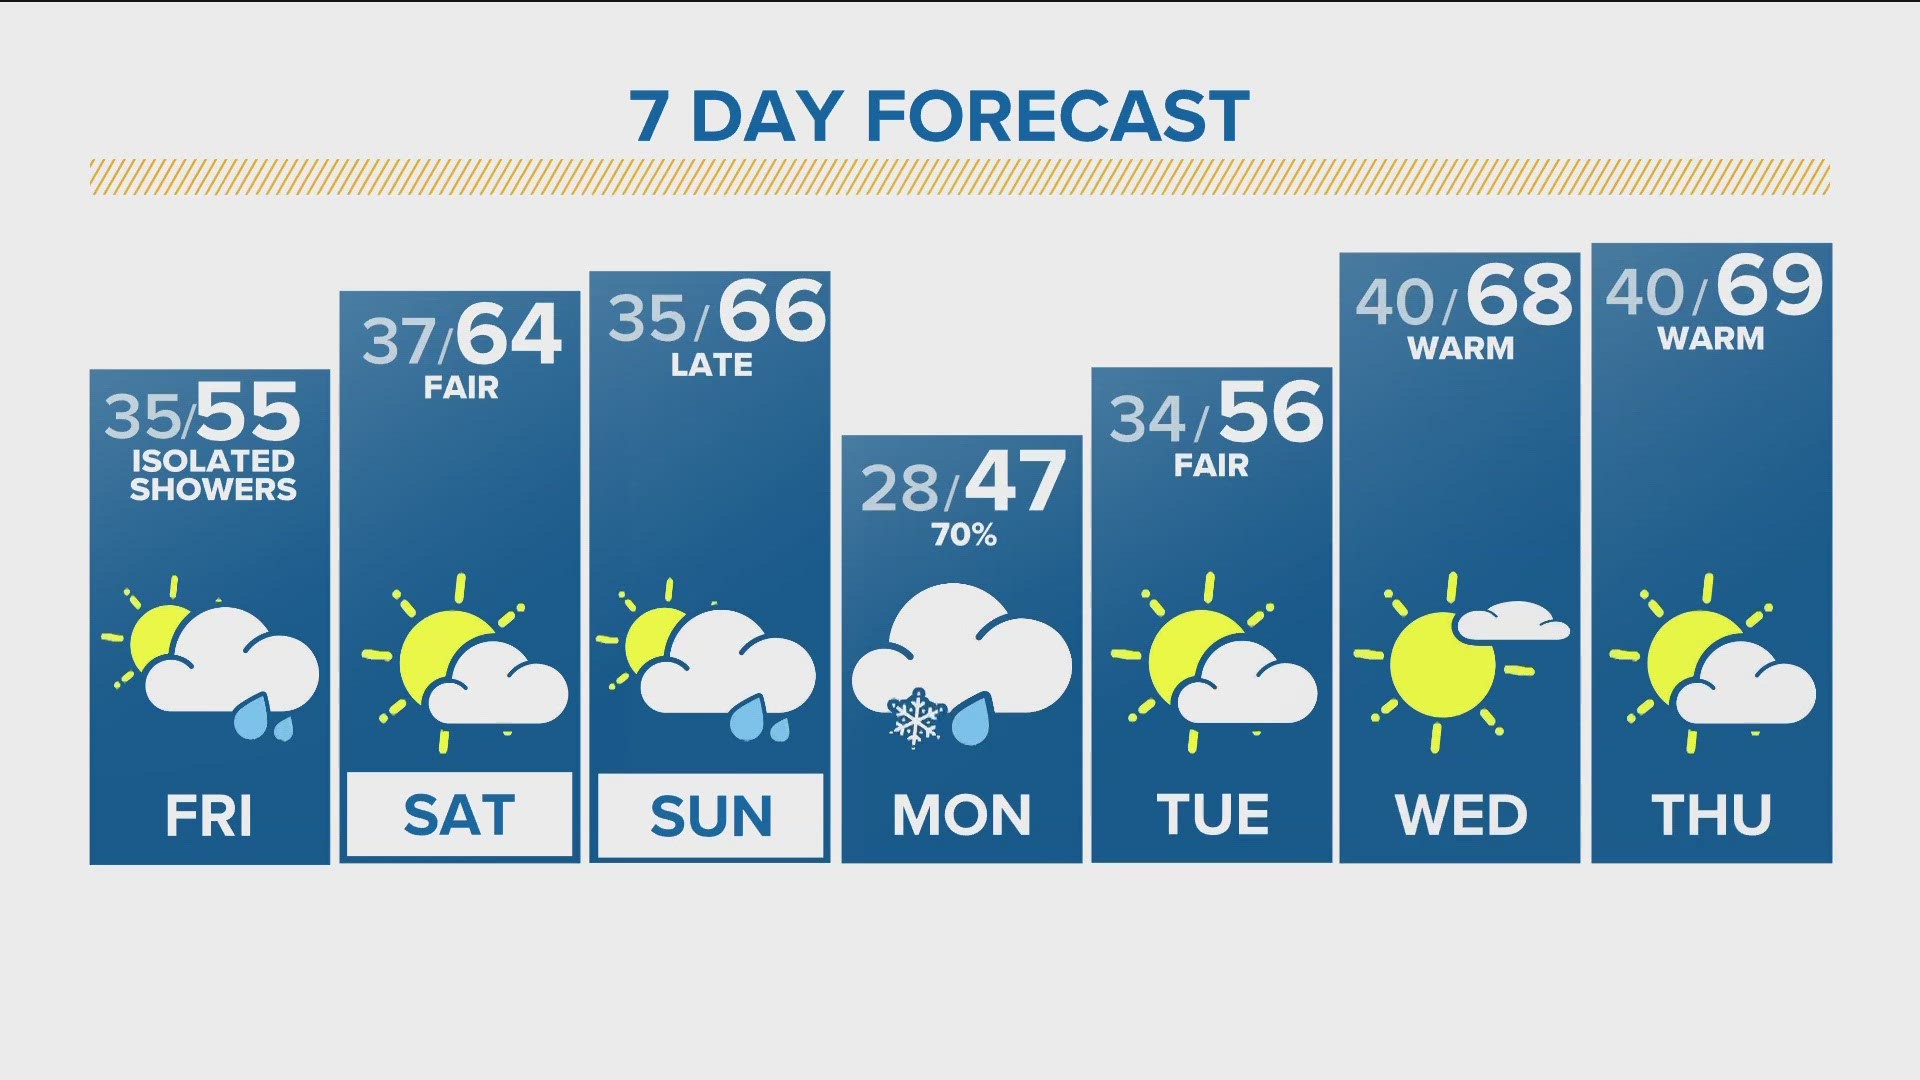 Easter Weekend looks like it will be in the 60s with a possibility of late showers on Sunday.